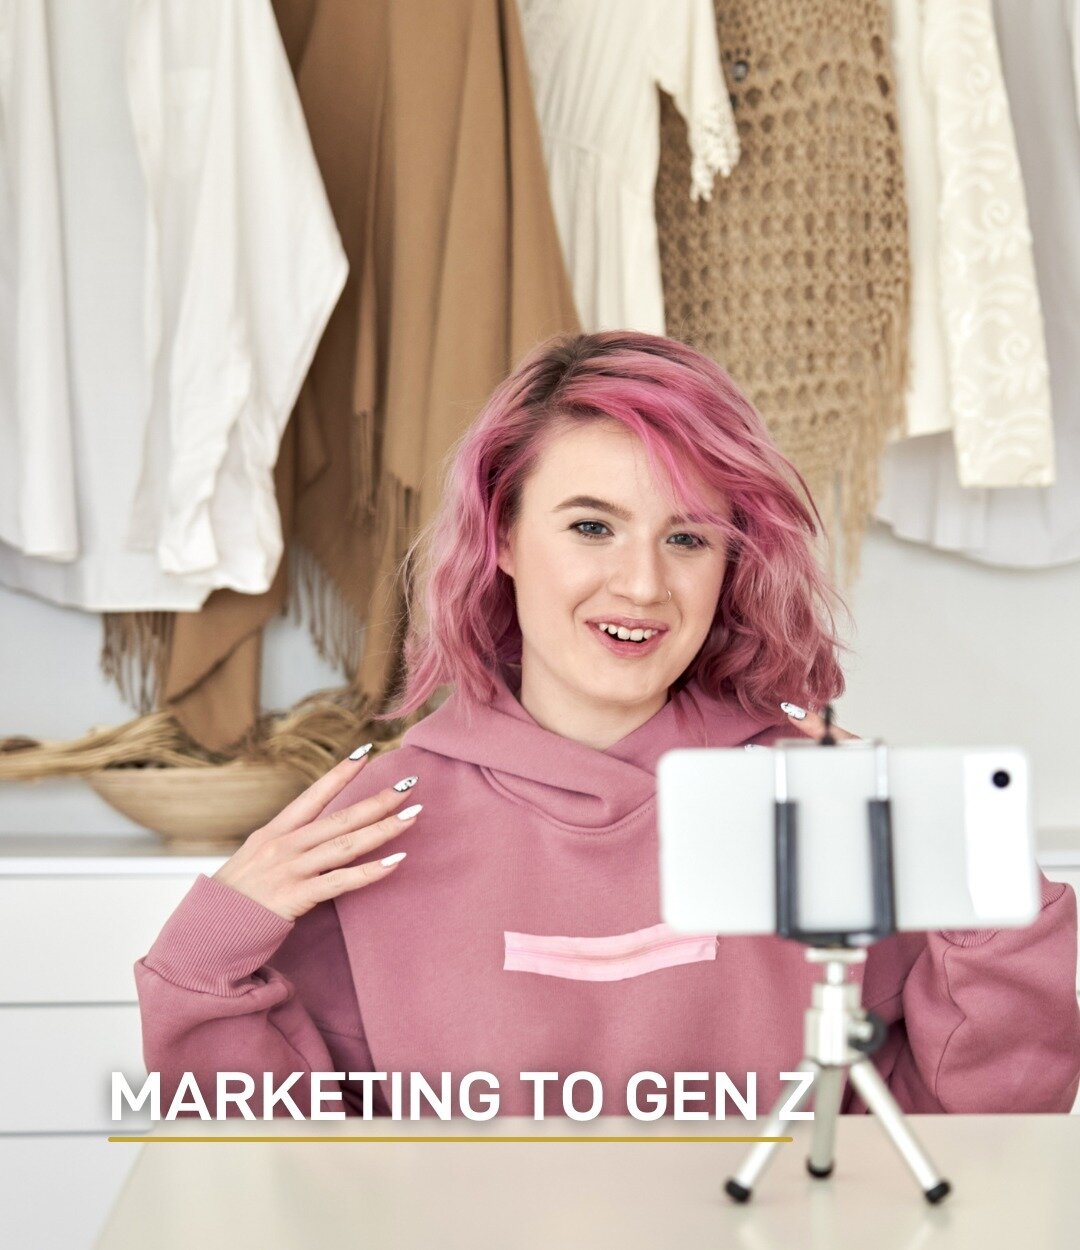 If you want to reach Gen Z with your content you will have to redefine your marketing strategy. This generation is built differently, they are digitally savvy and an empowered audience. They crave authenticity and value inclusivity, so make sure your